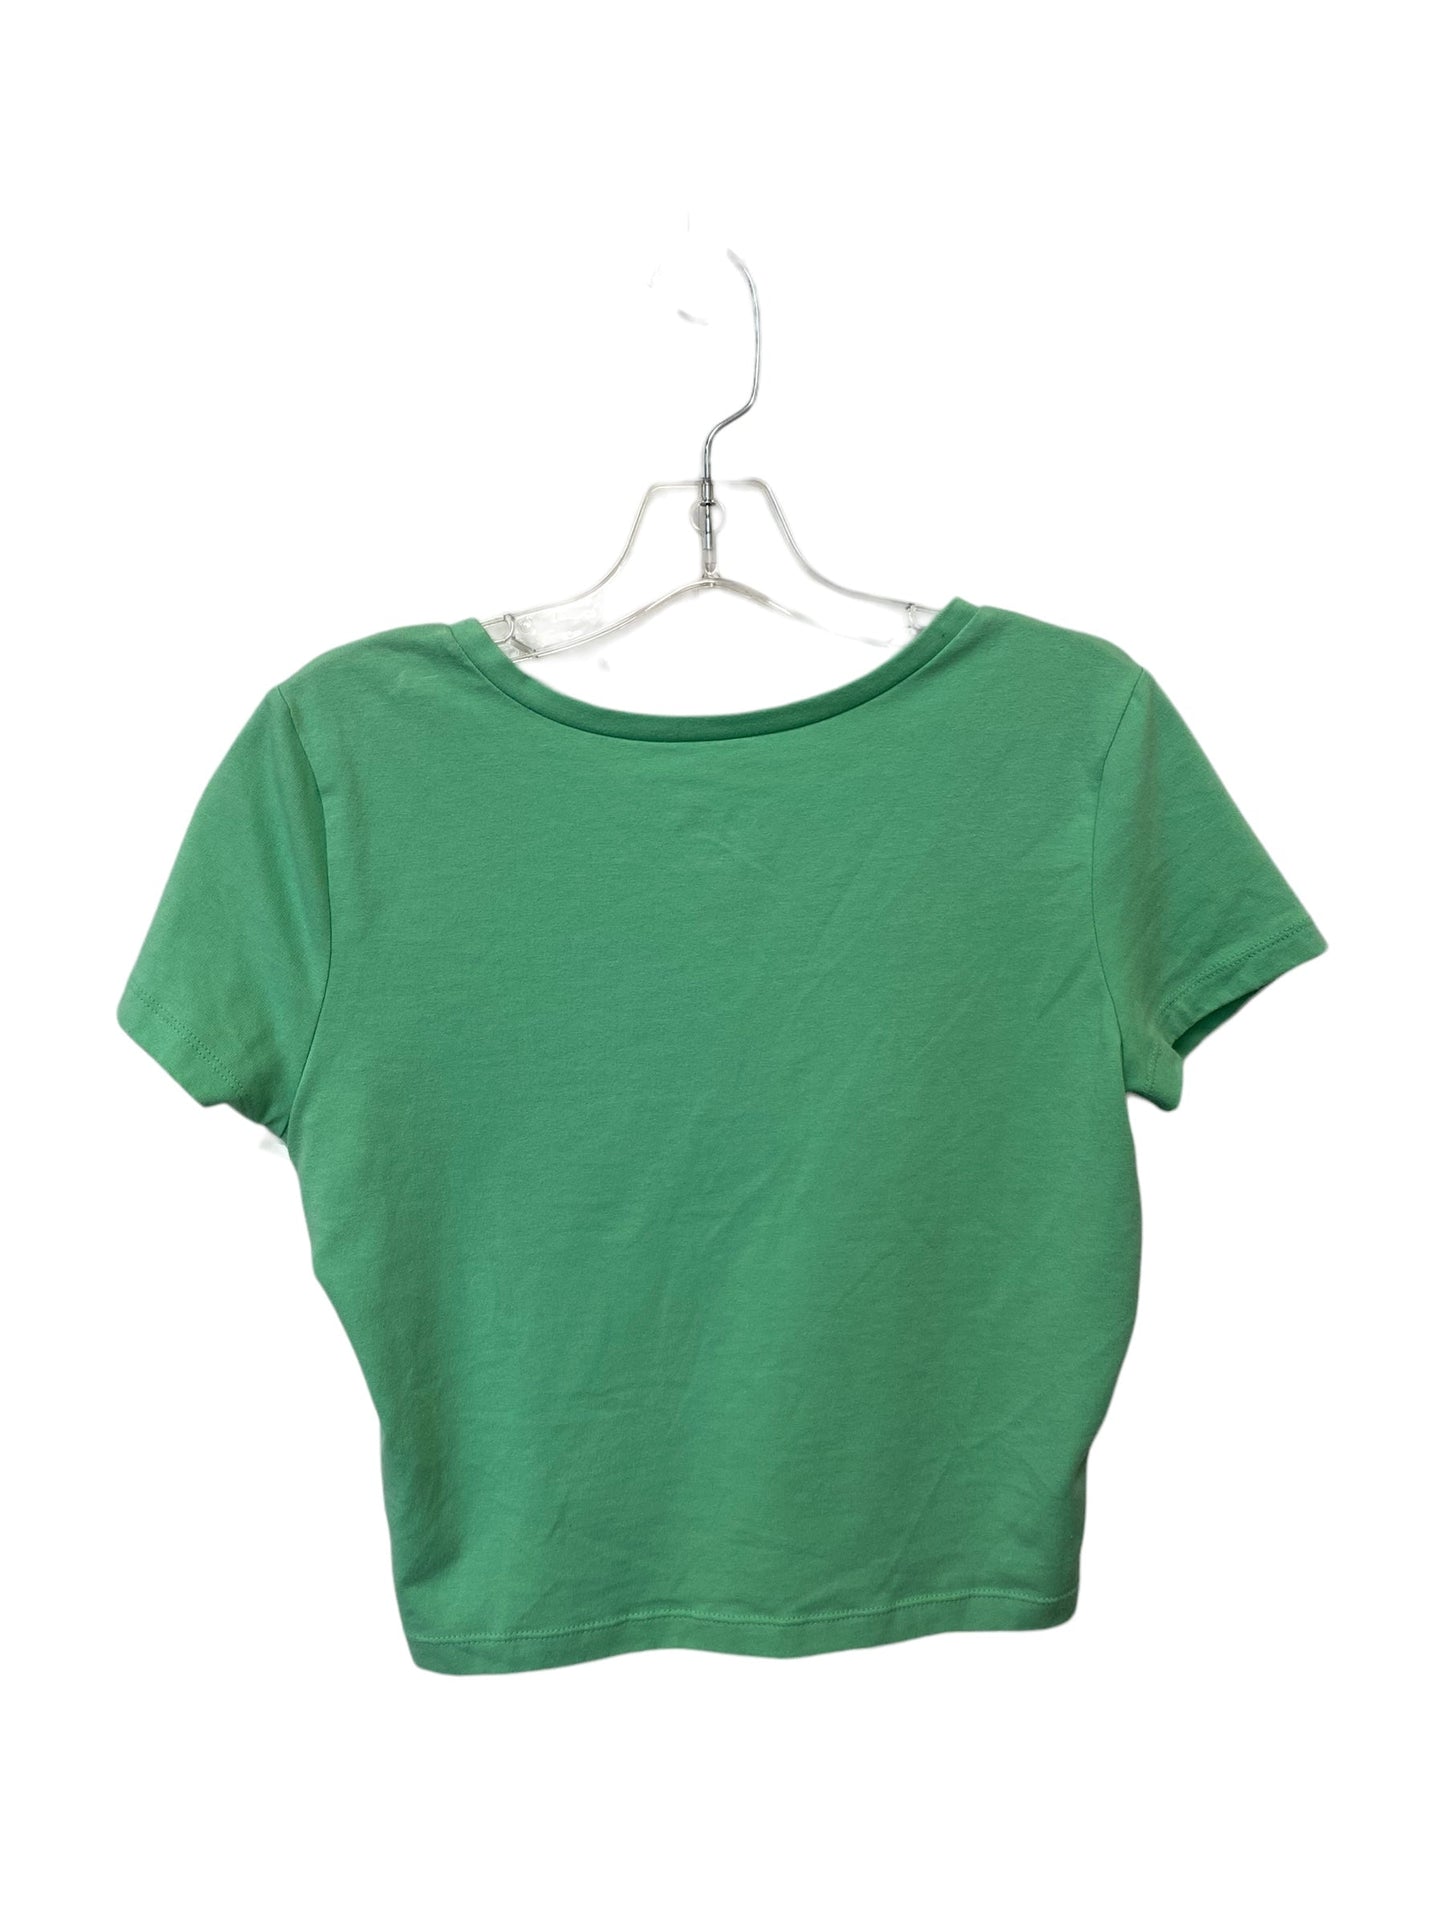 Green Top Short Sleeve Wild Fable, Size M